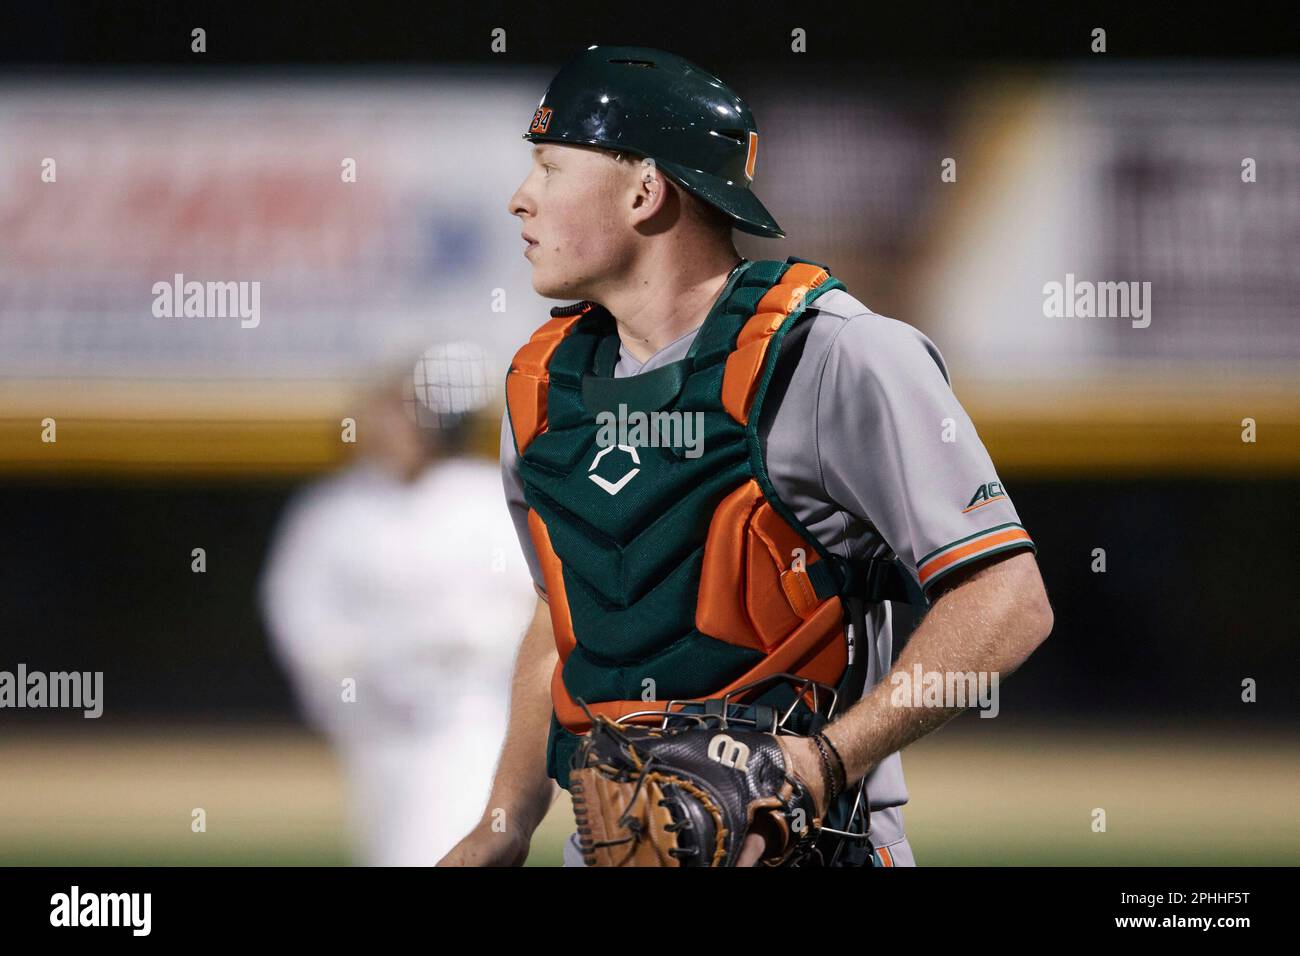 Miami Hurricanes catcher JD Jones (34) on defense against the Wake Forest  Demon Deacons at David F. Couch Ballpark on March 24, 2023 in  Winston-Salem, North Carolina. (Brian Westerholt/Four Seam Images via